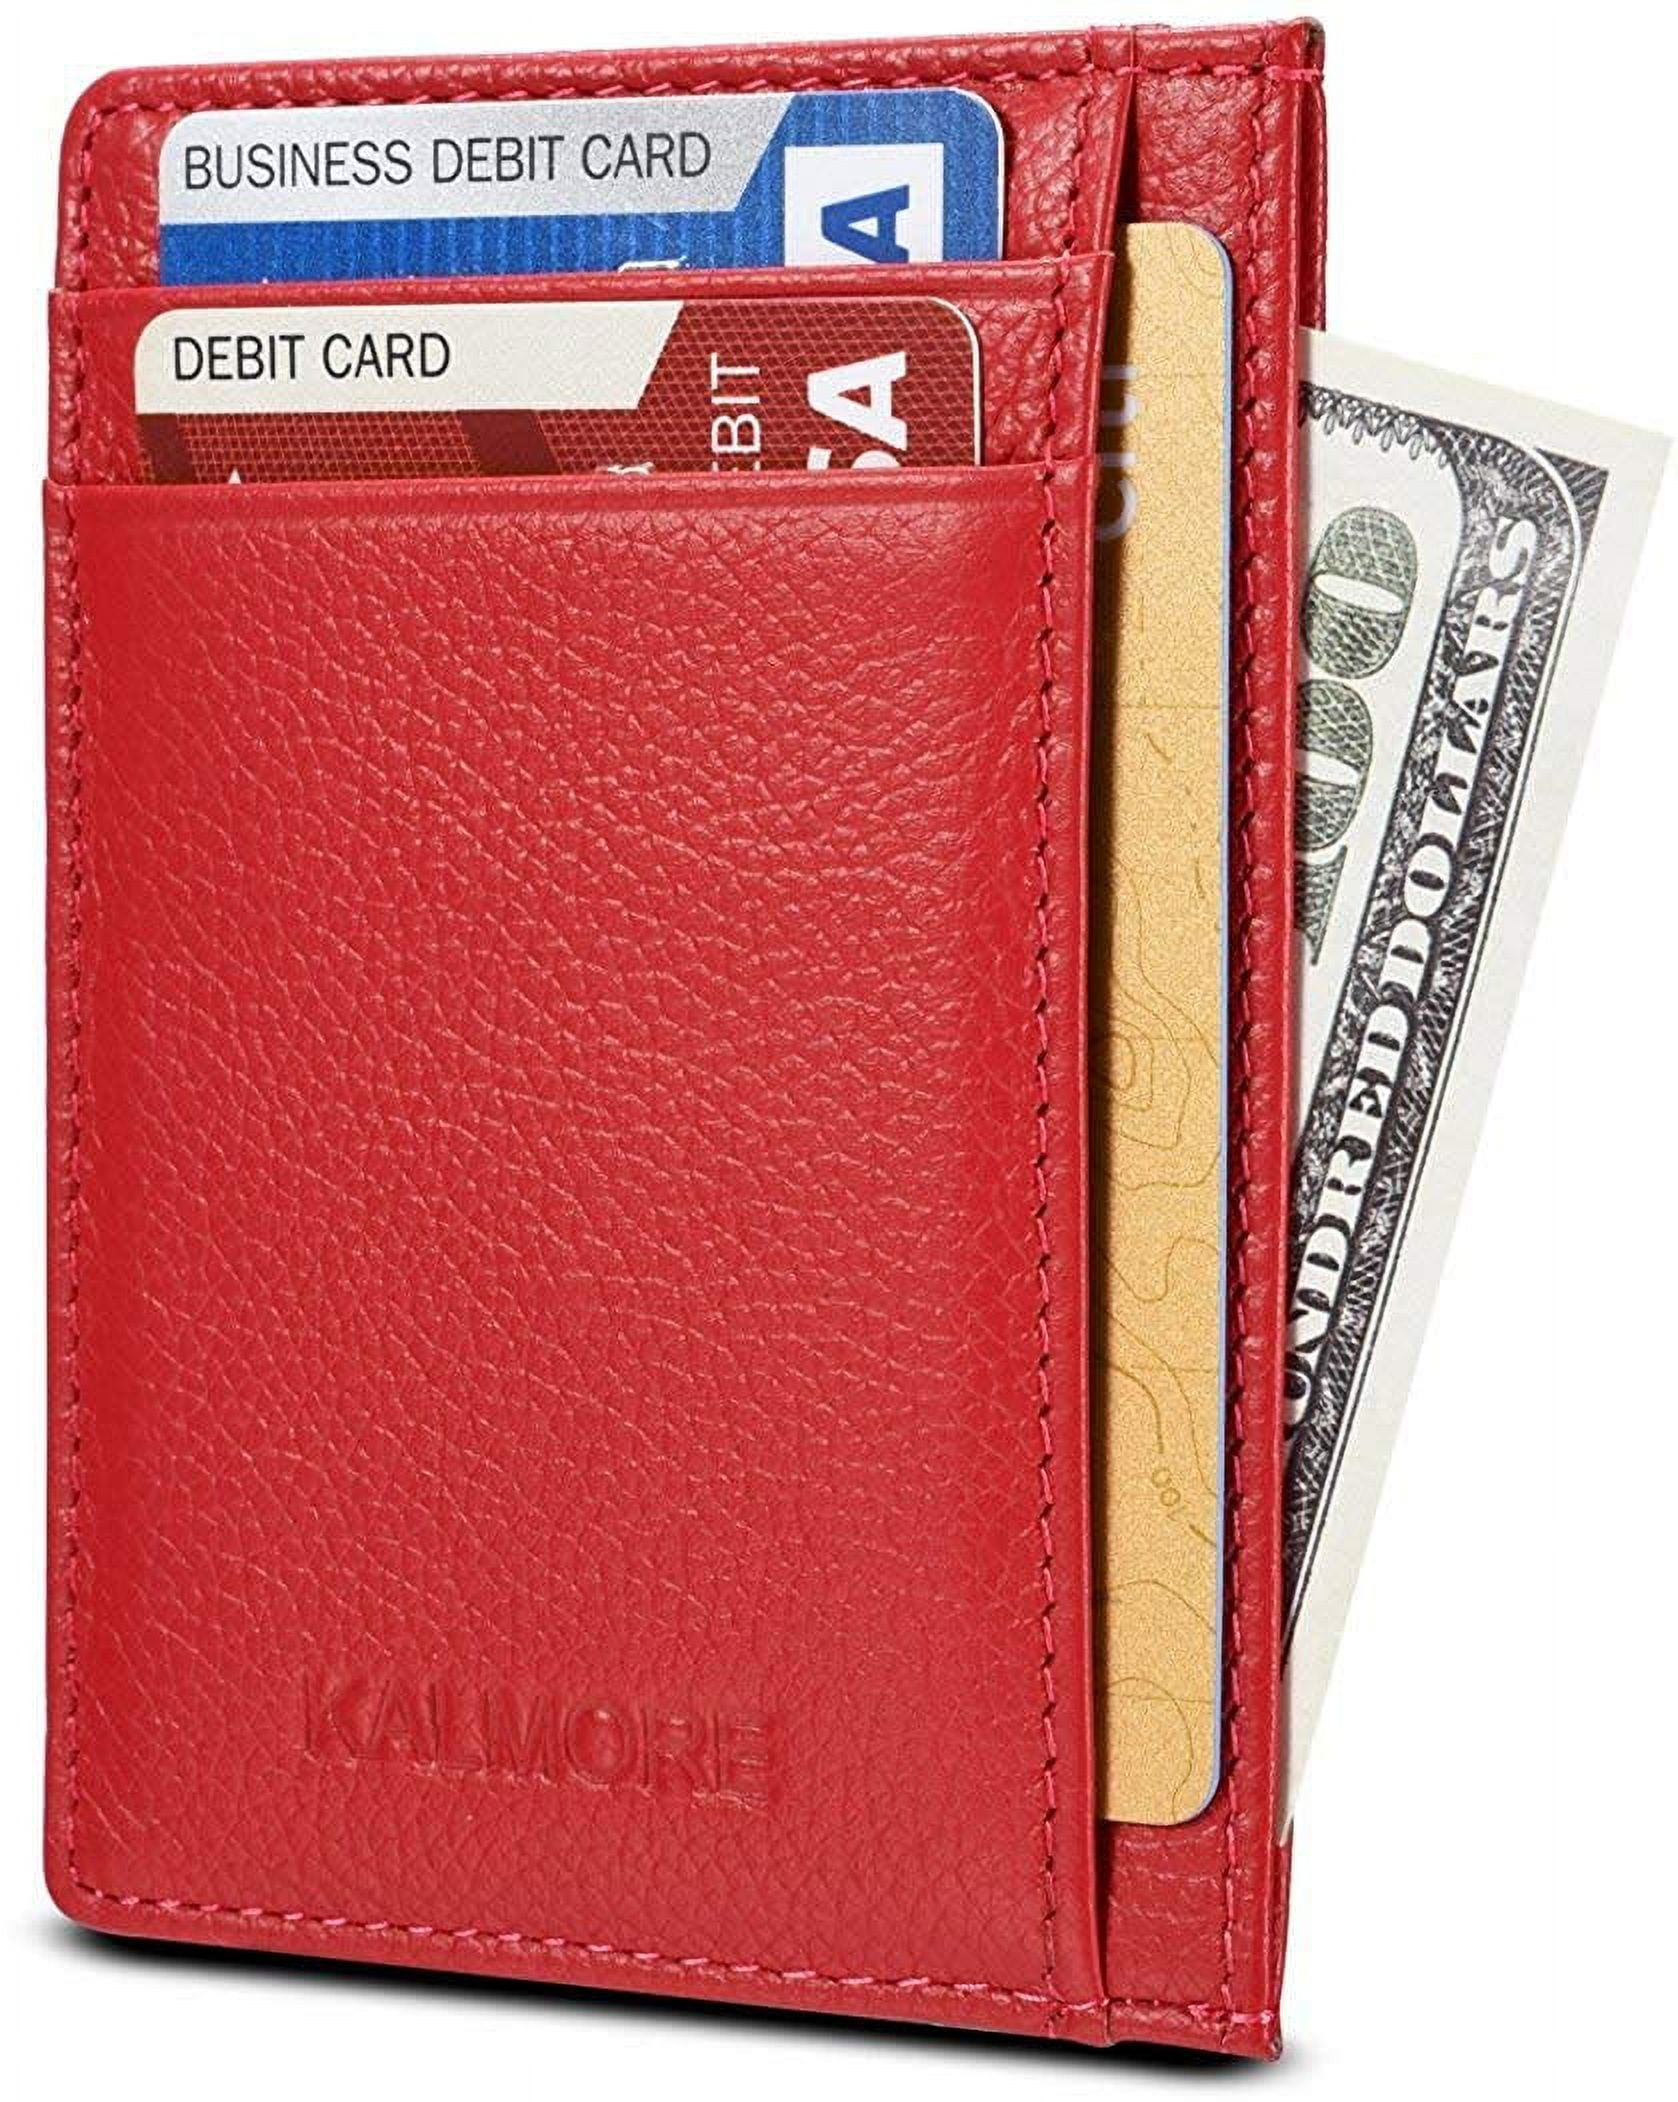 2021 Minimalist Wallets Genuine Leather For Women and Men Cute